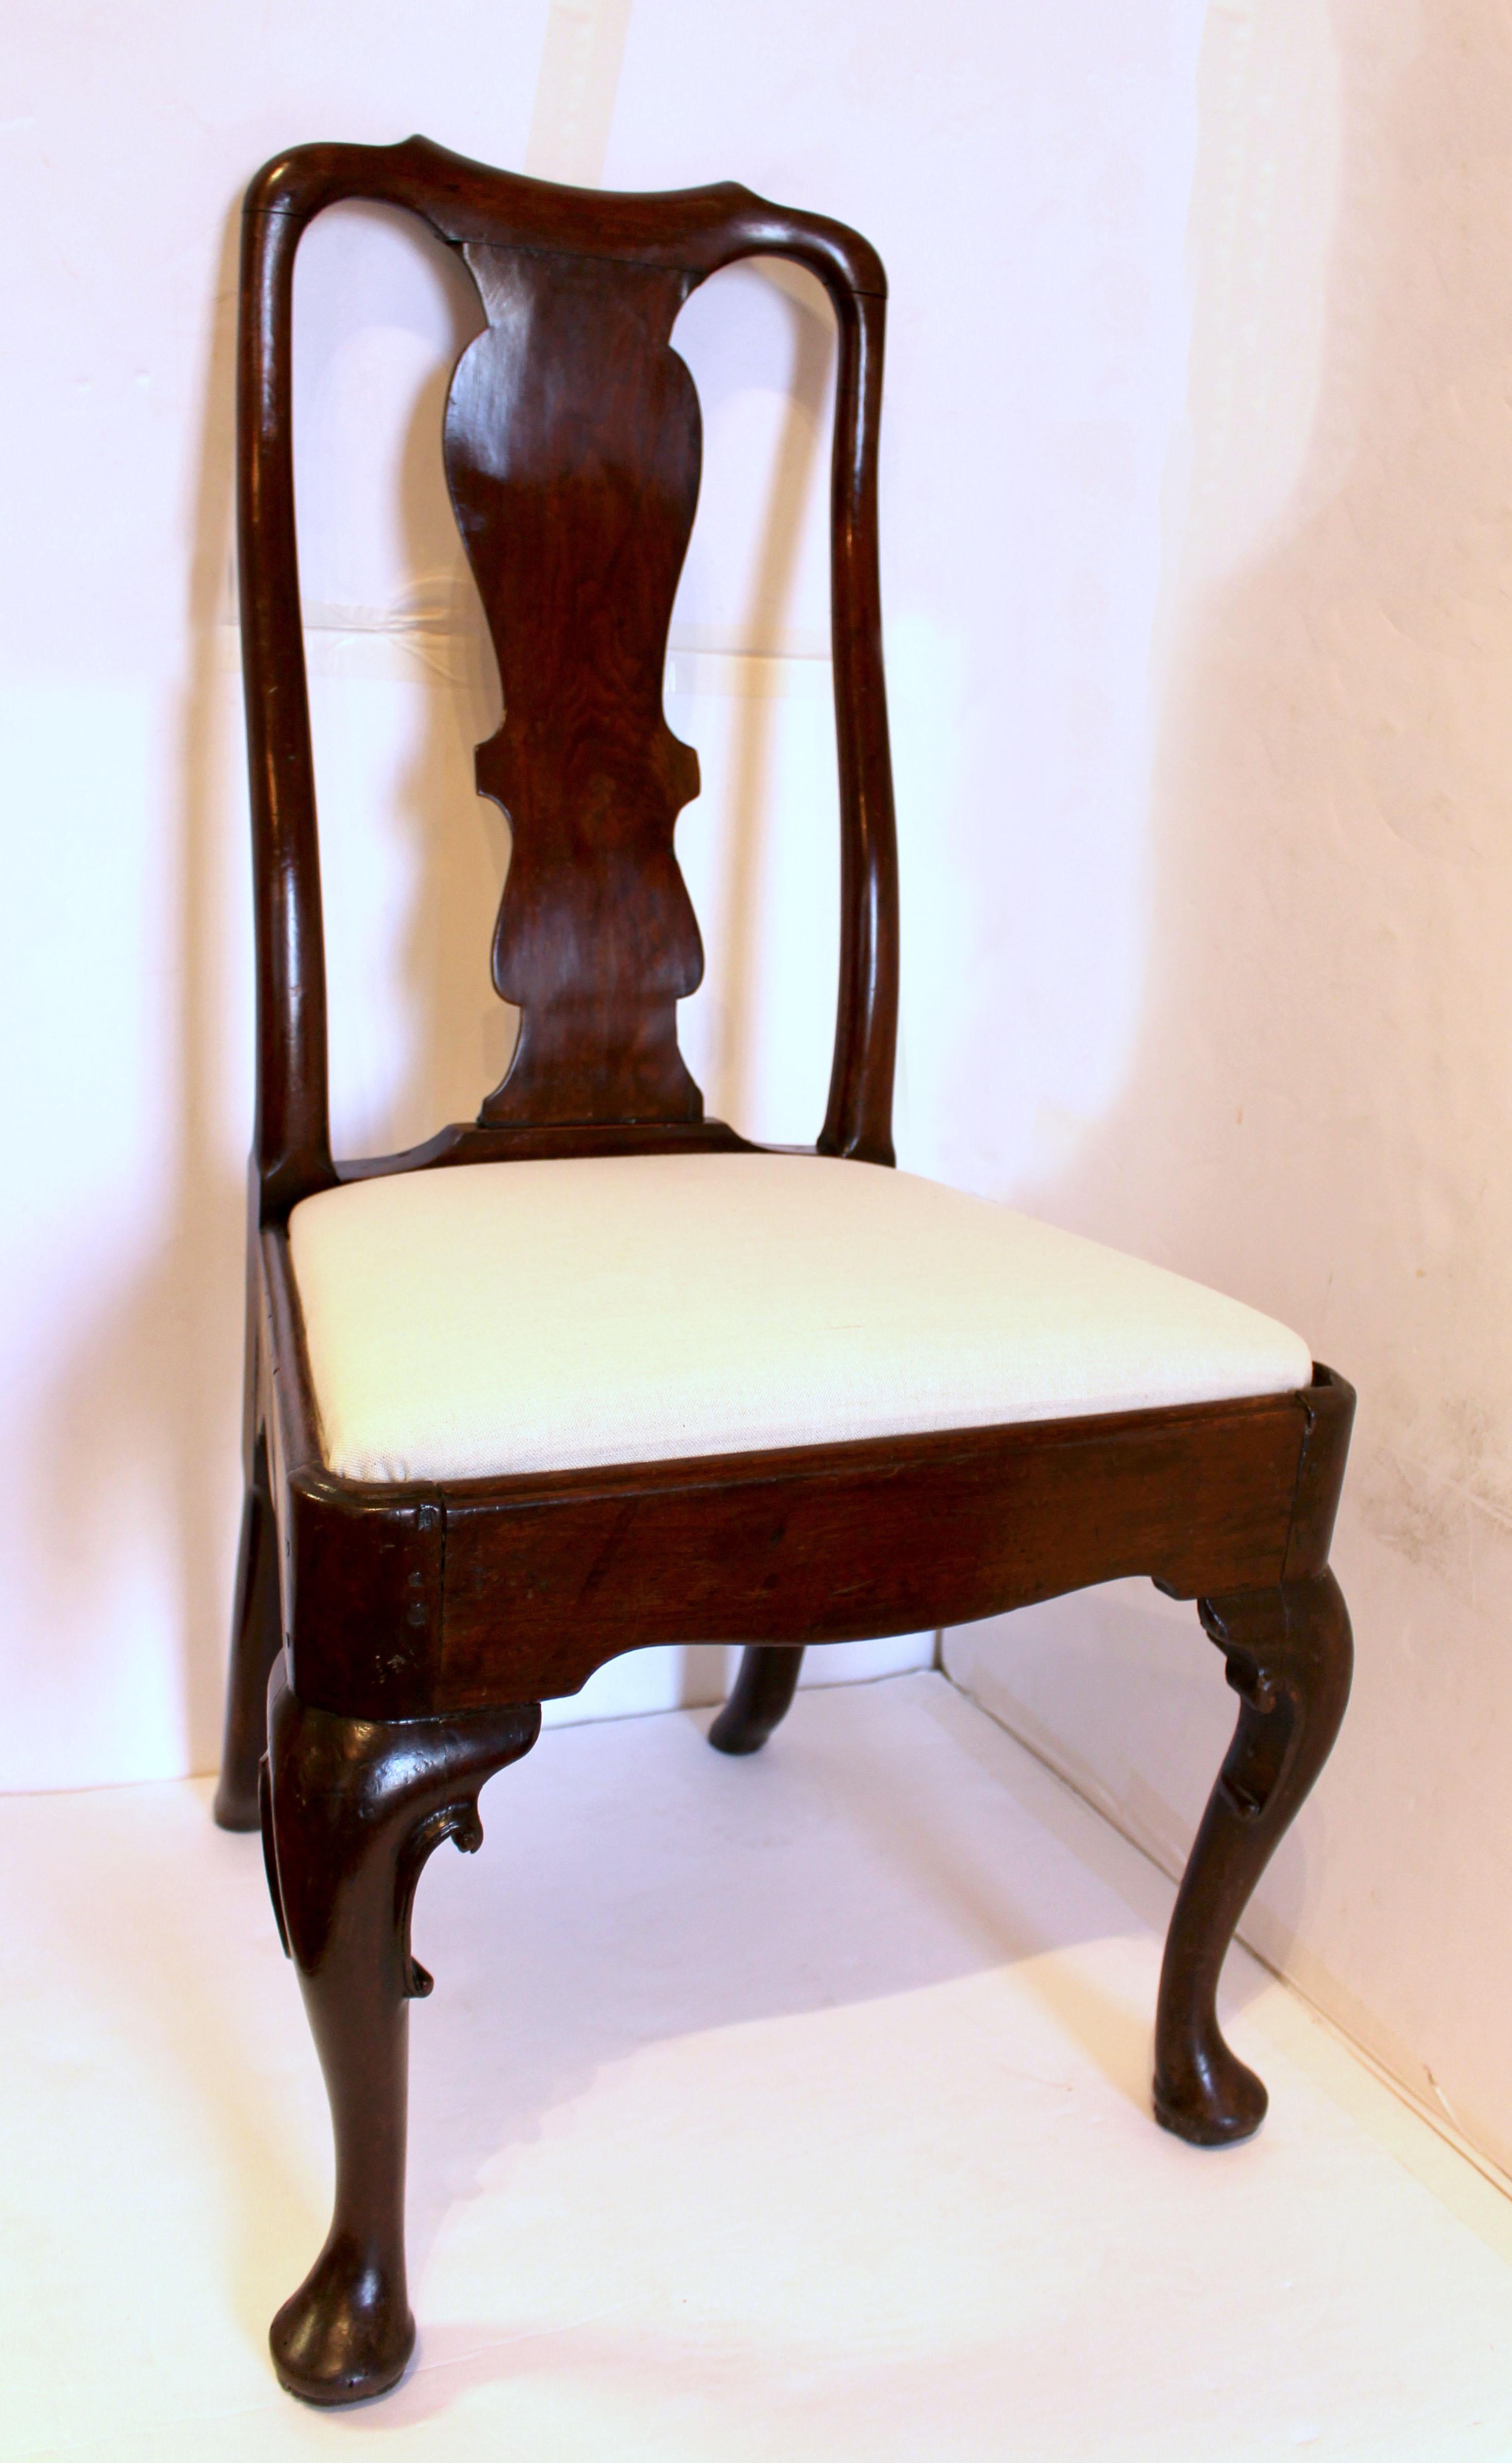 Circa 1720-40 Queen Anne side chair, English. Walnut. Raised on c-scroll carved well shaped cabriole legs ending in pad feet. Shaped returns. Outswept back legs. Typical shaped backsplat of the design era with well shaped crest rail.
21.25